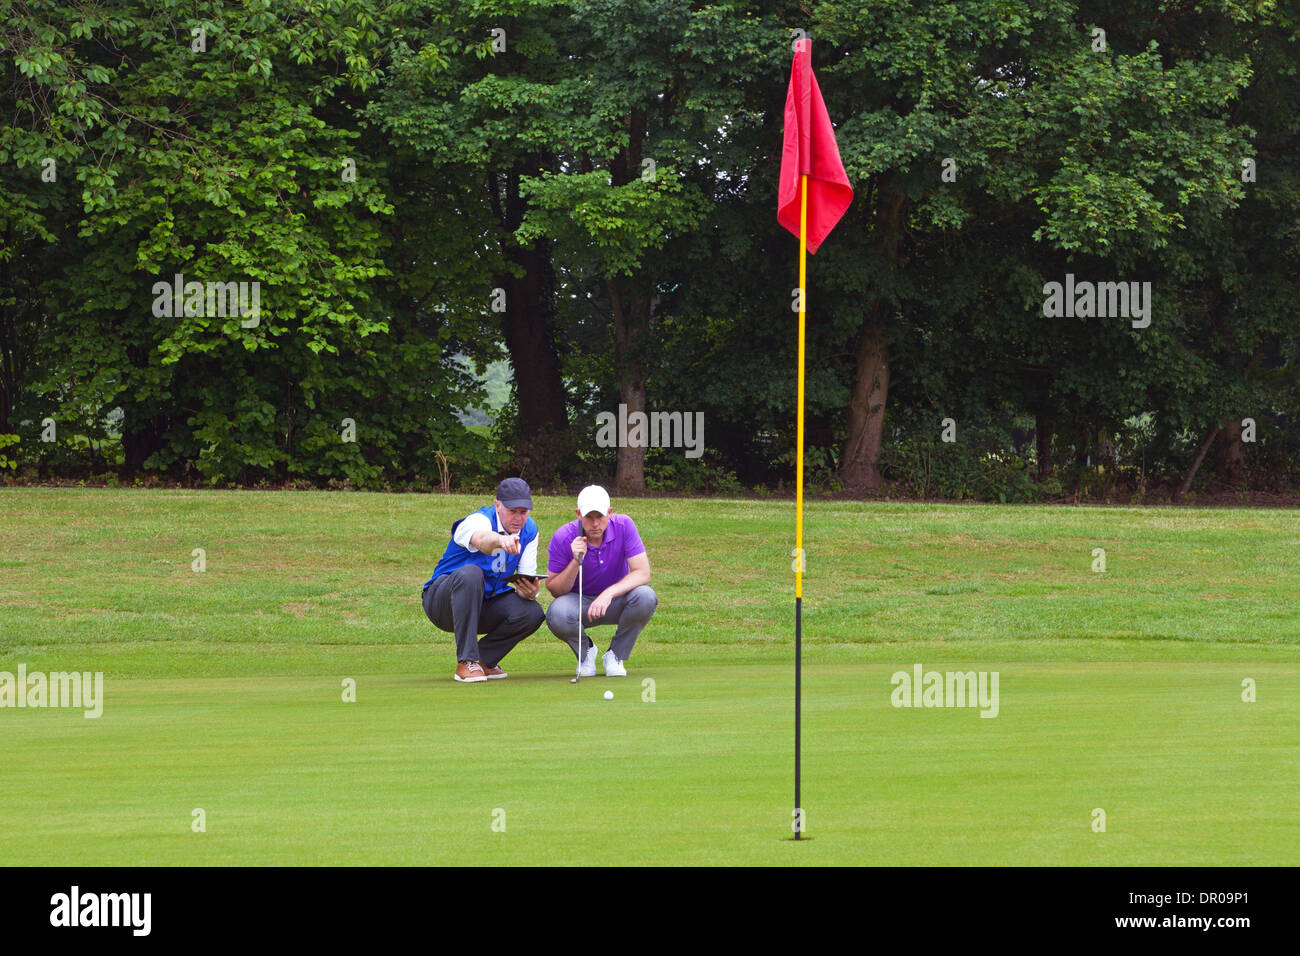 A professional golfer and his caddy reading the green to judge the line of the putt. Series of three photos. Stock Photo